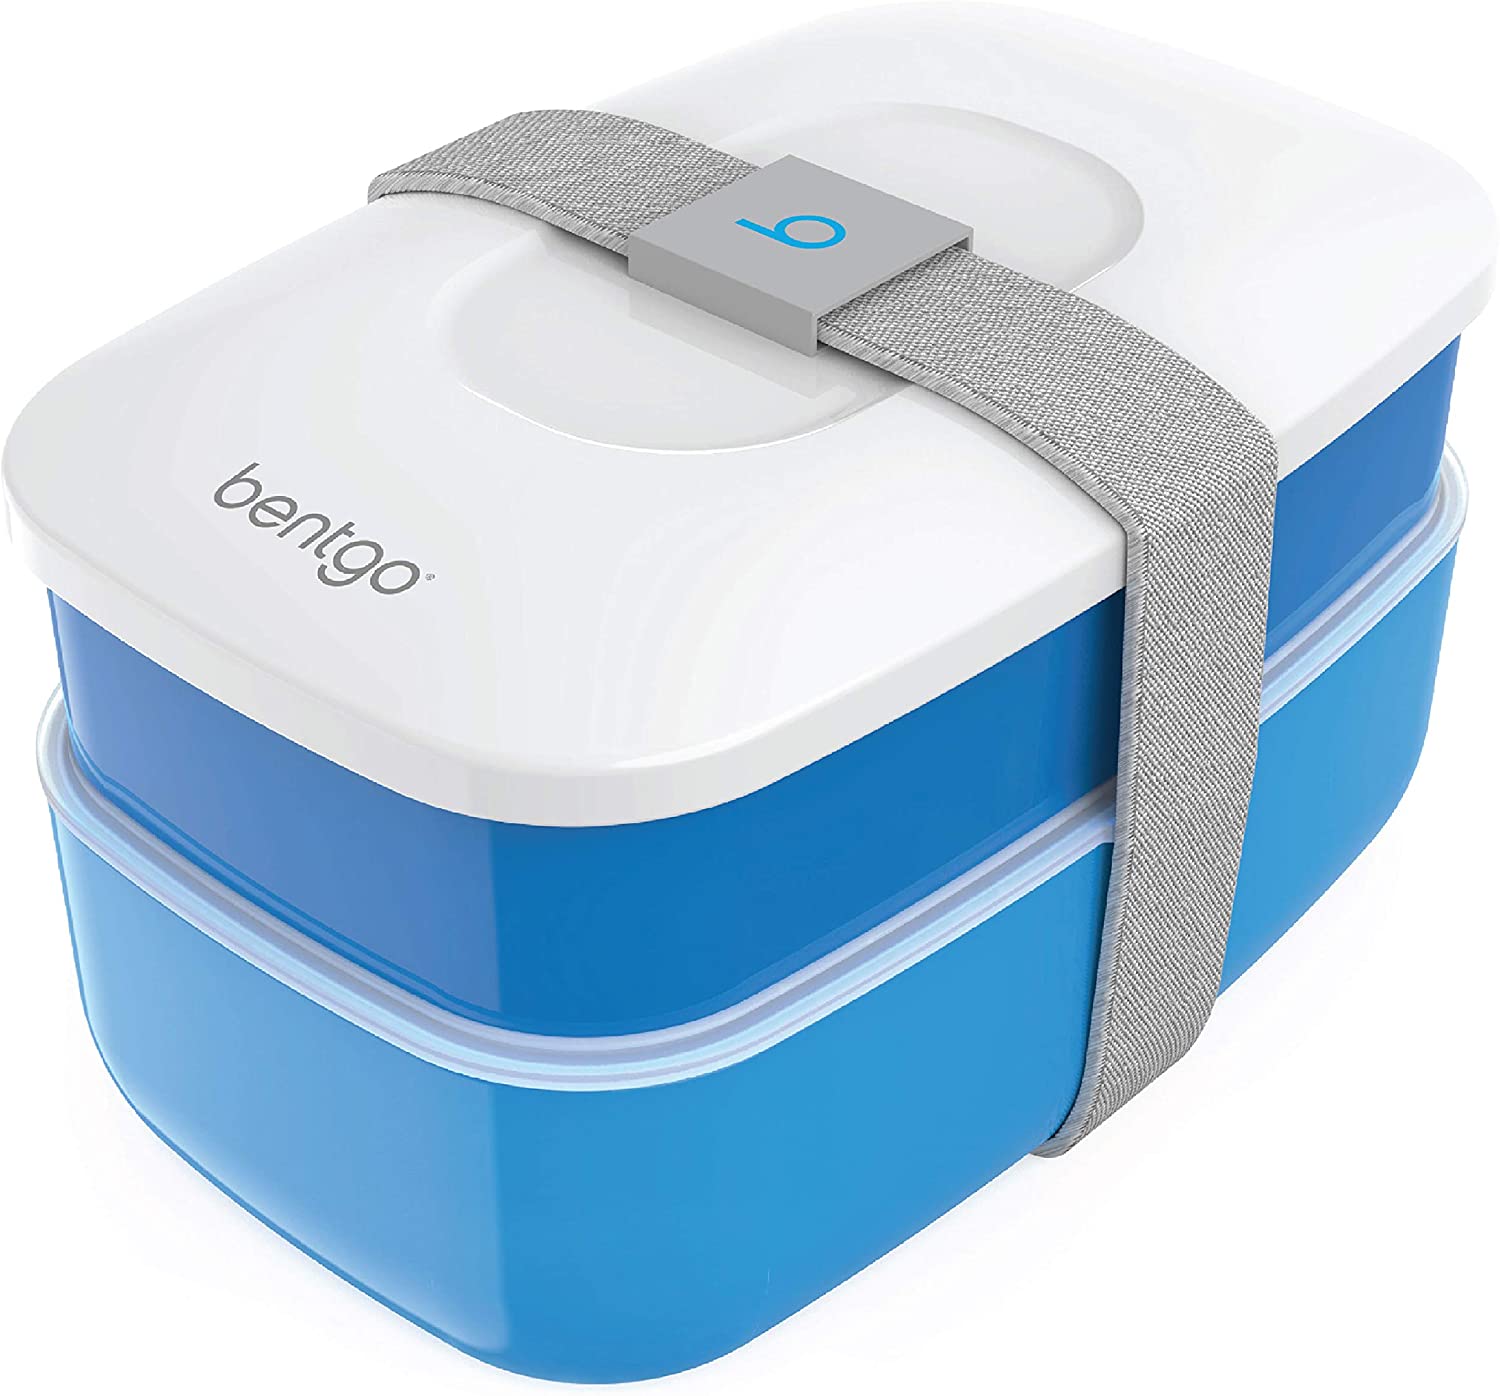 Bentgo Classic (Blue) - All-in-One Stackable Lunch Box Solution - Sleek and Modern Bento Box Design Includes 2 Stackable Containers, Built-in Plastic Silverware, and Sealing Strap - image 1 of 5